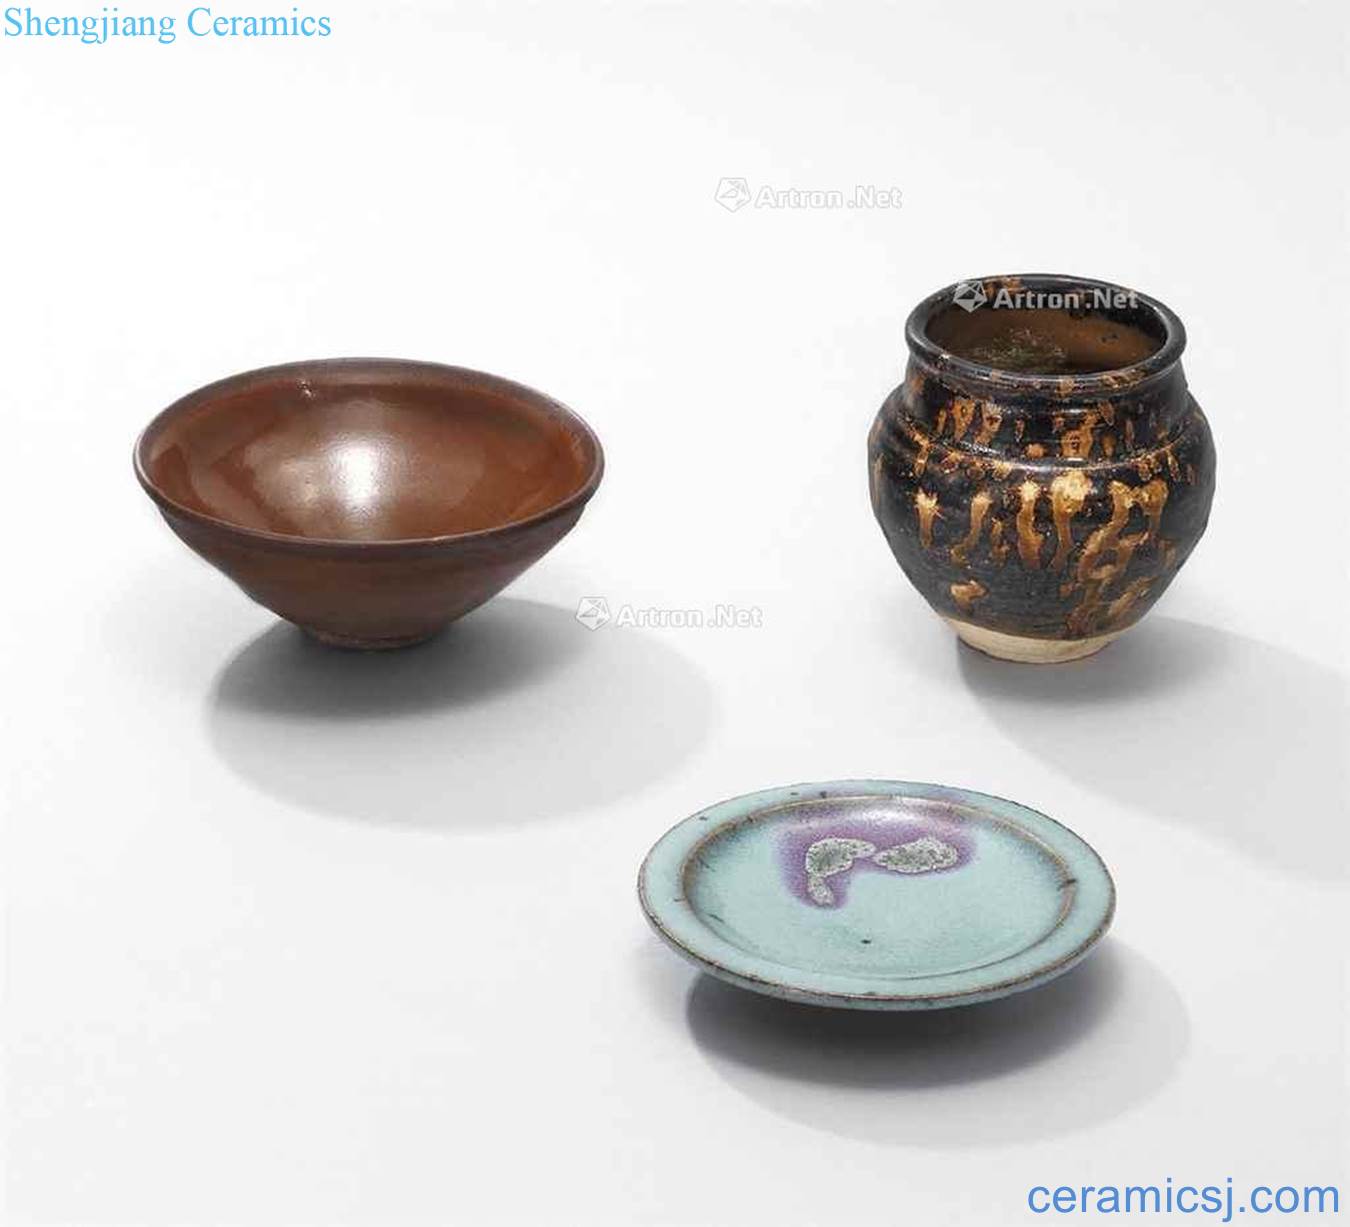 The song dynasty Blue glaze masterpieces purple small dish Ji states hawksbill glaze canister and persimmon 盌